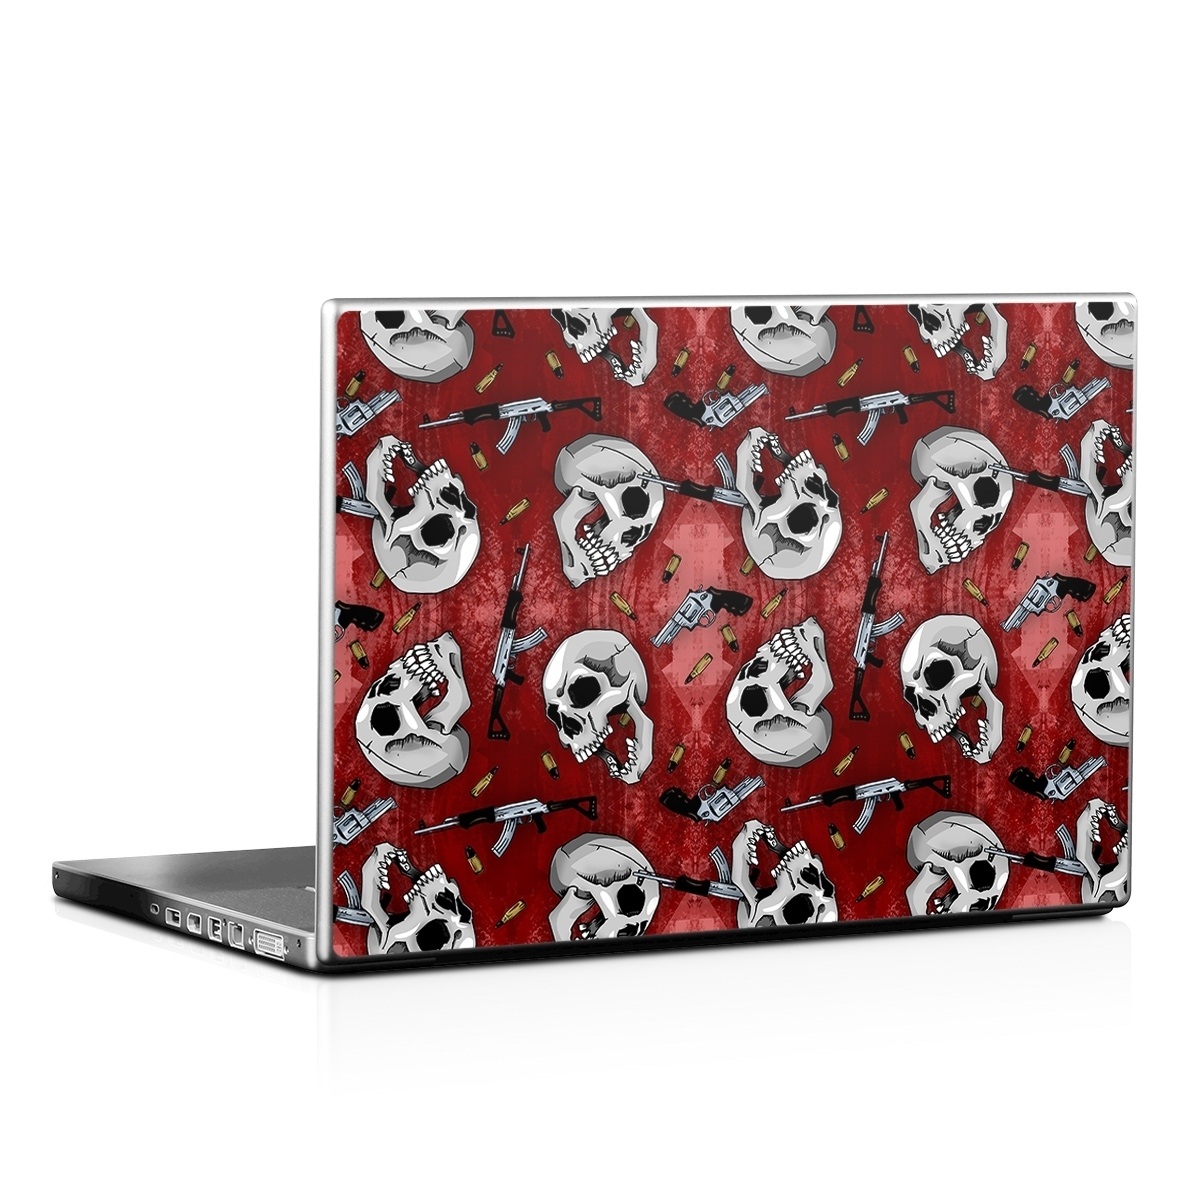 Laptop Skin - Issues (Image 1)